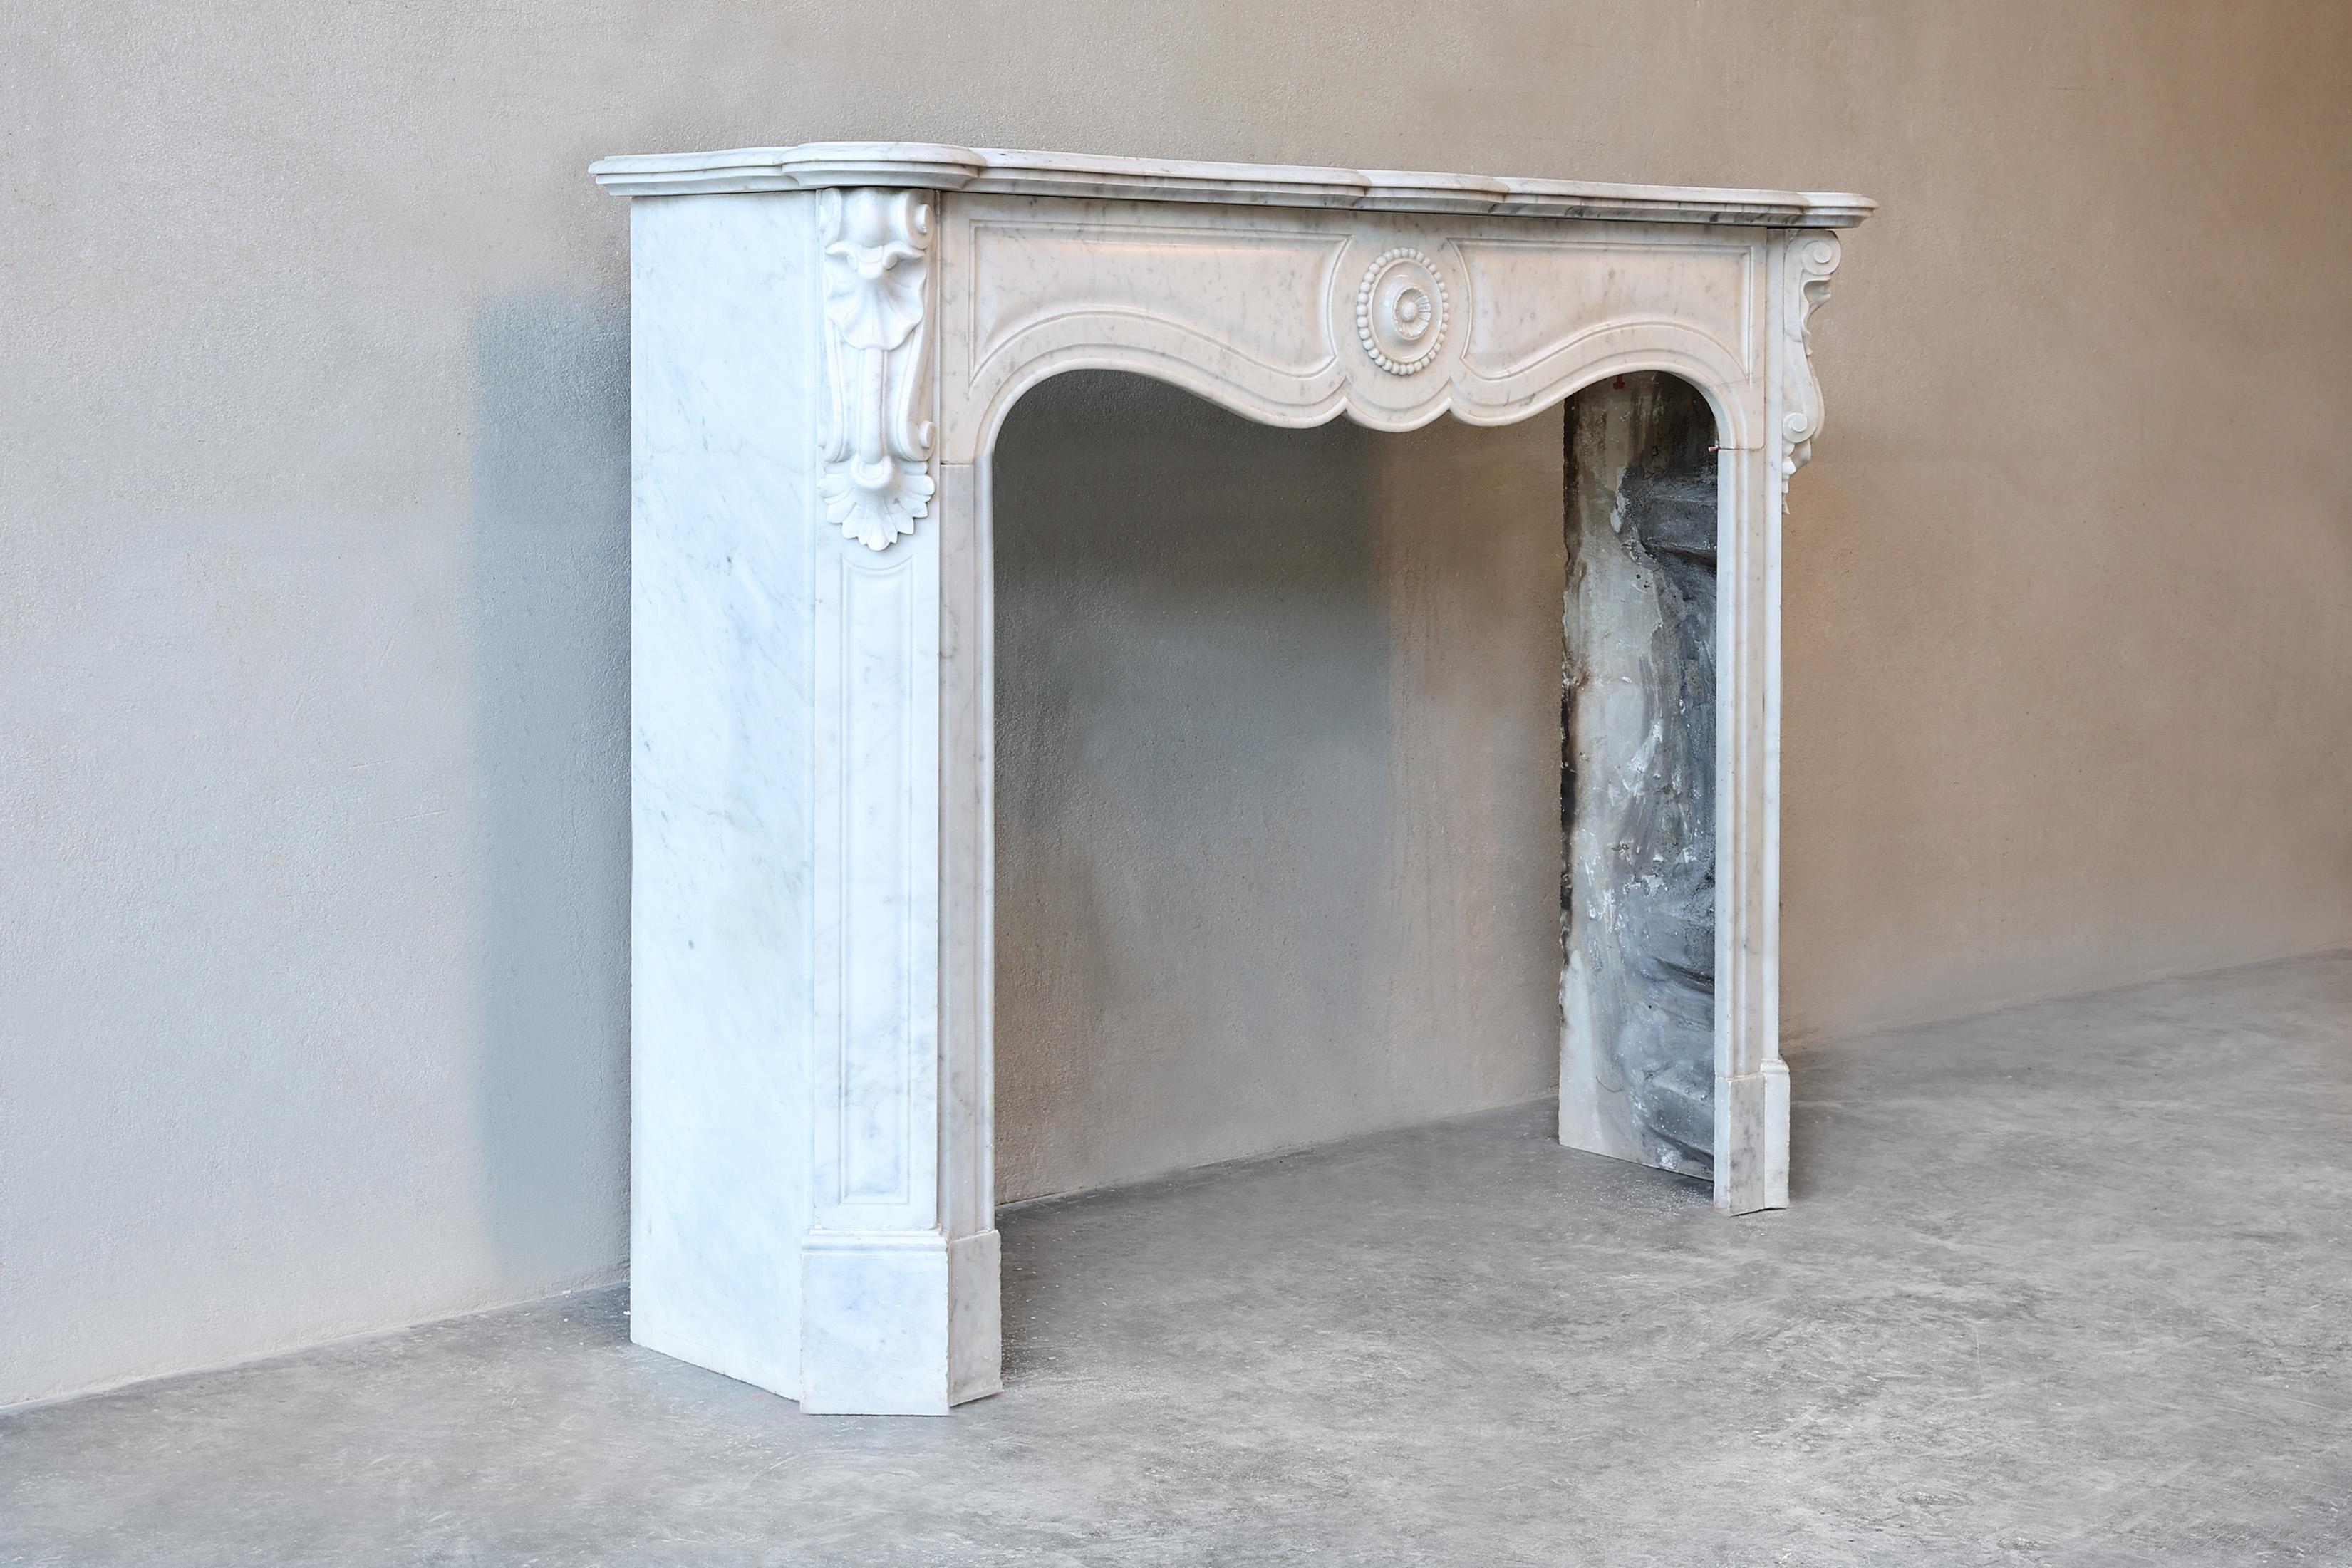 Beautiful friendly antique fireplace of Carrara marble from the 19th century. This fireplace is in Pompadour style and has beautiful ornaments in the front part and on the legs! The format is compact and suitable for many interiors.